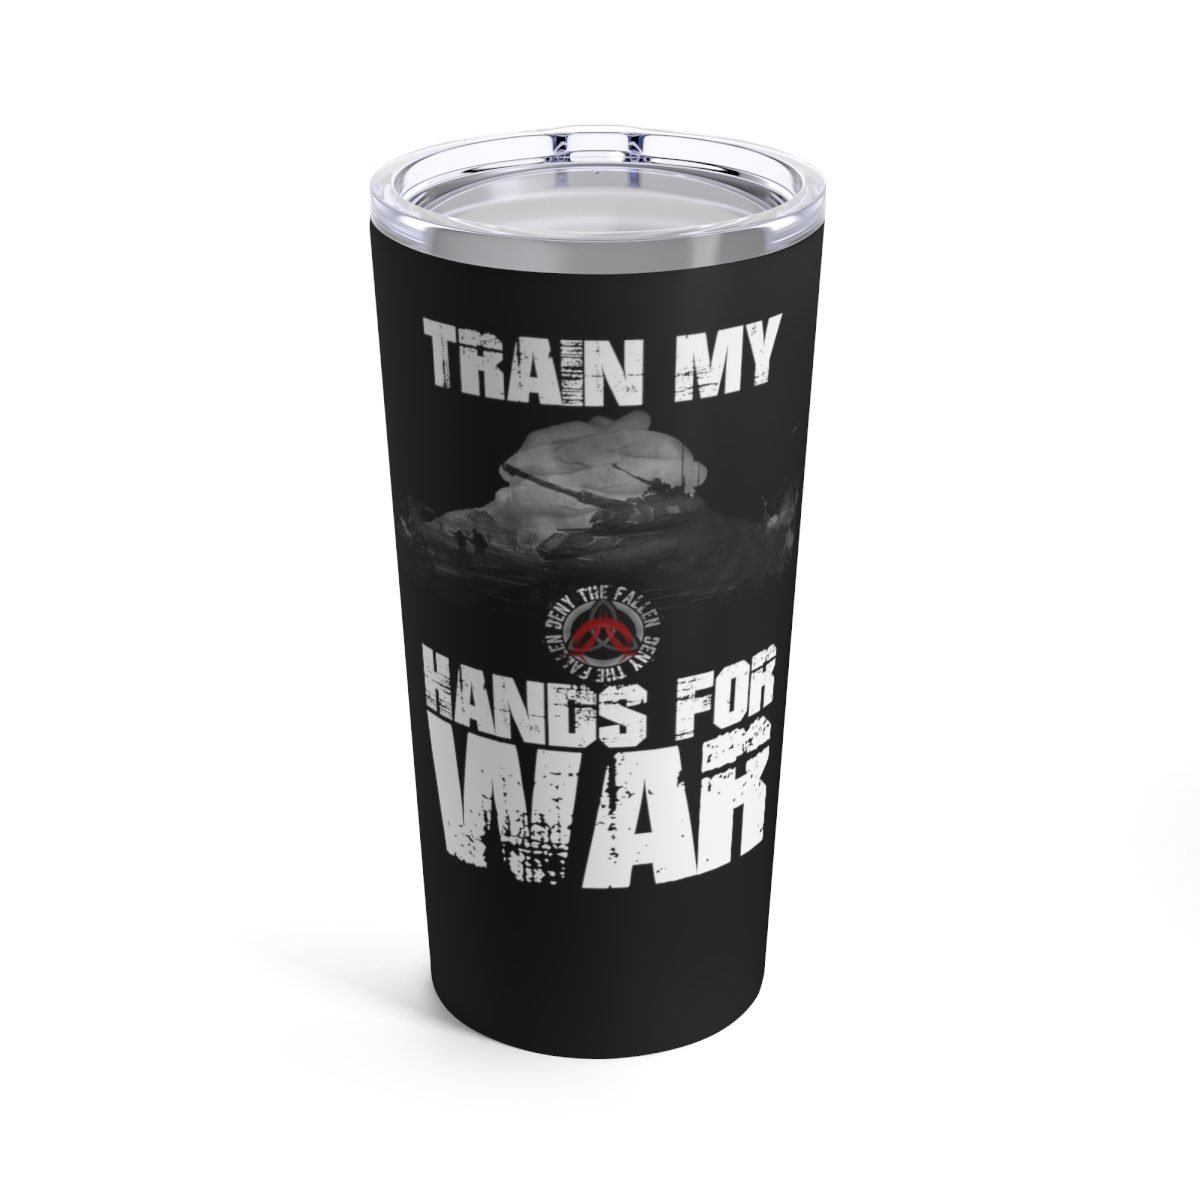 Deny The Fallen – Hands For War Black and White Version 20oz Stainless Steel Tumbler